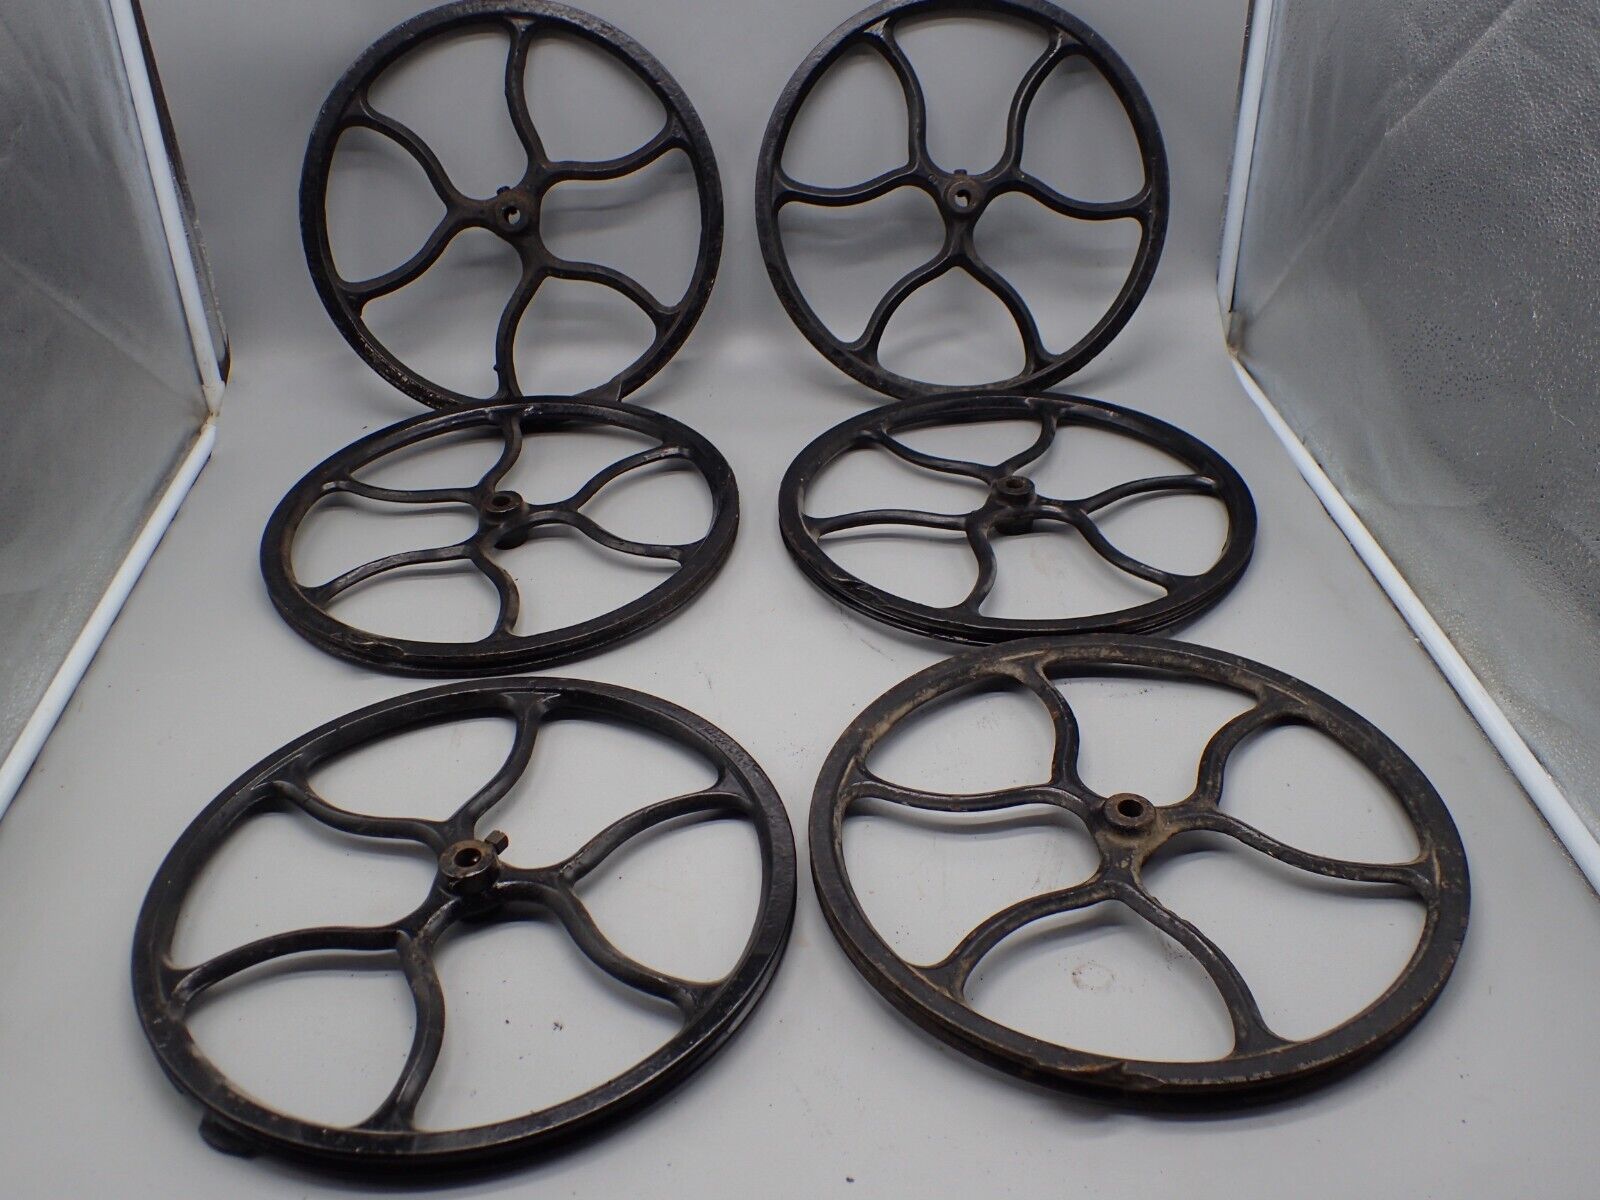 Lot Of 6 Matching Antique 12 1/2" Singer Pulley Flywheel Steam Punk Pulley Decor